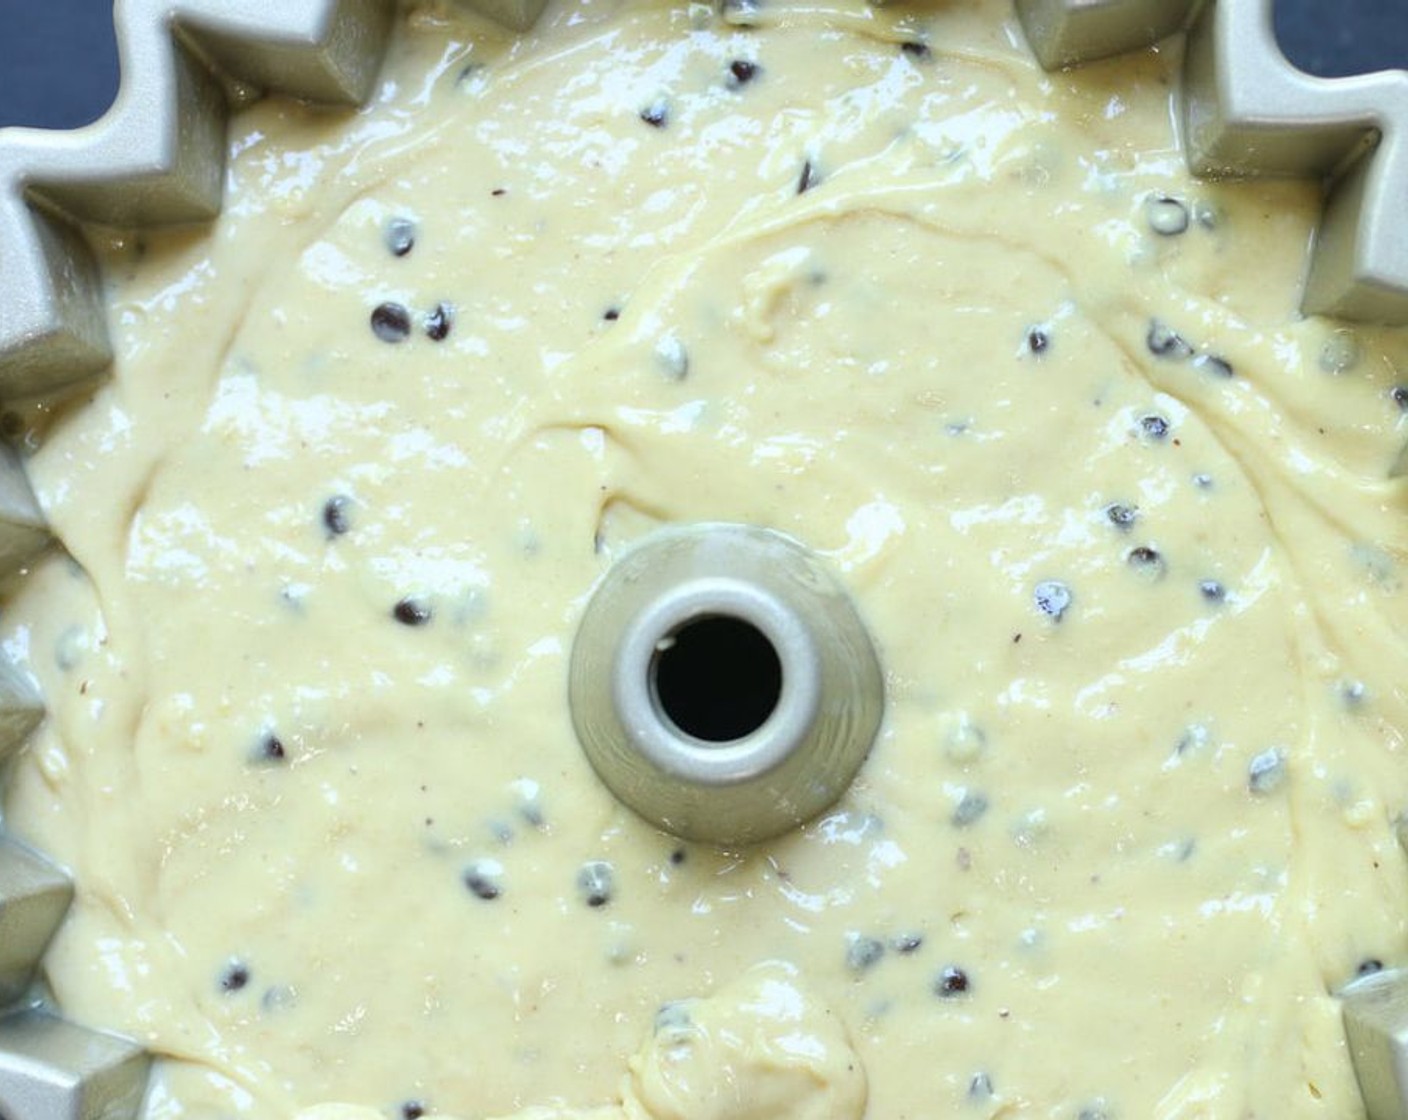 step 4 Pour the cake batter evenly into the prepared bundt pan, smoothing the top gently.